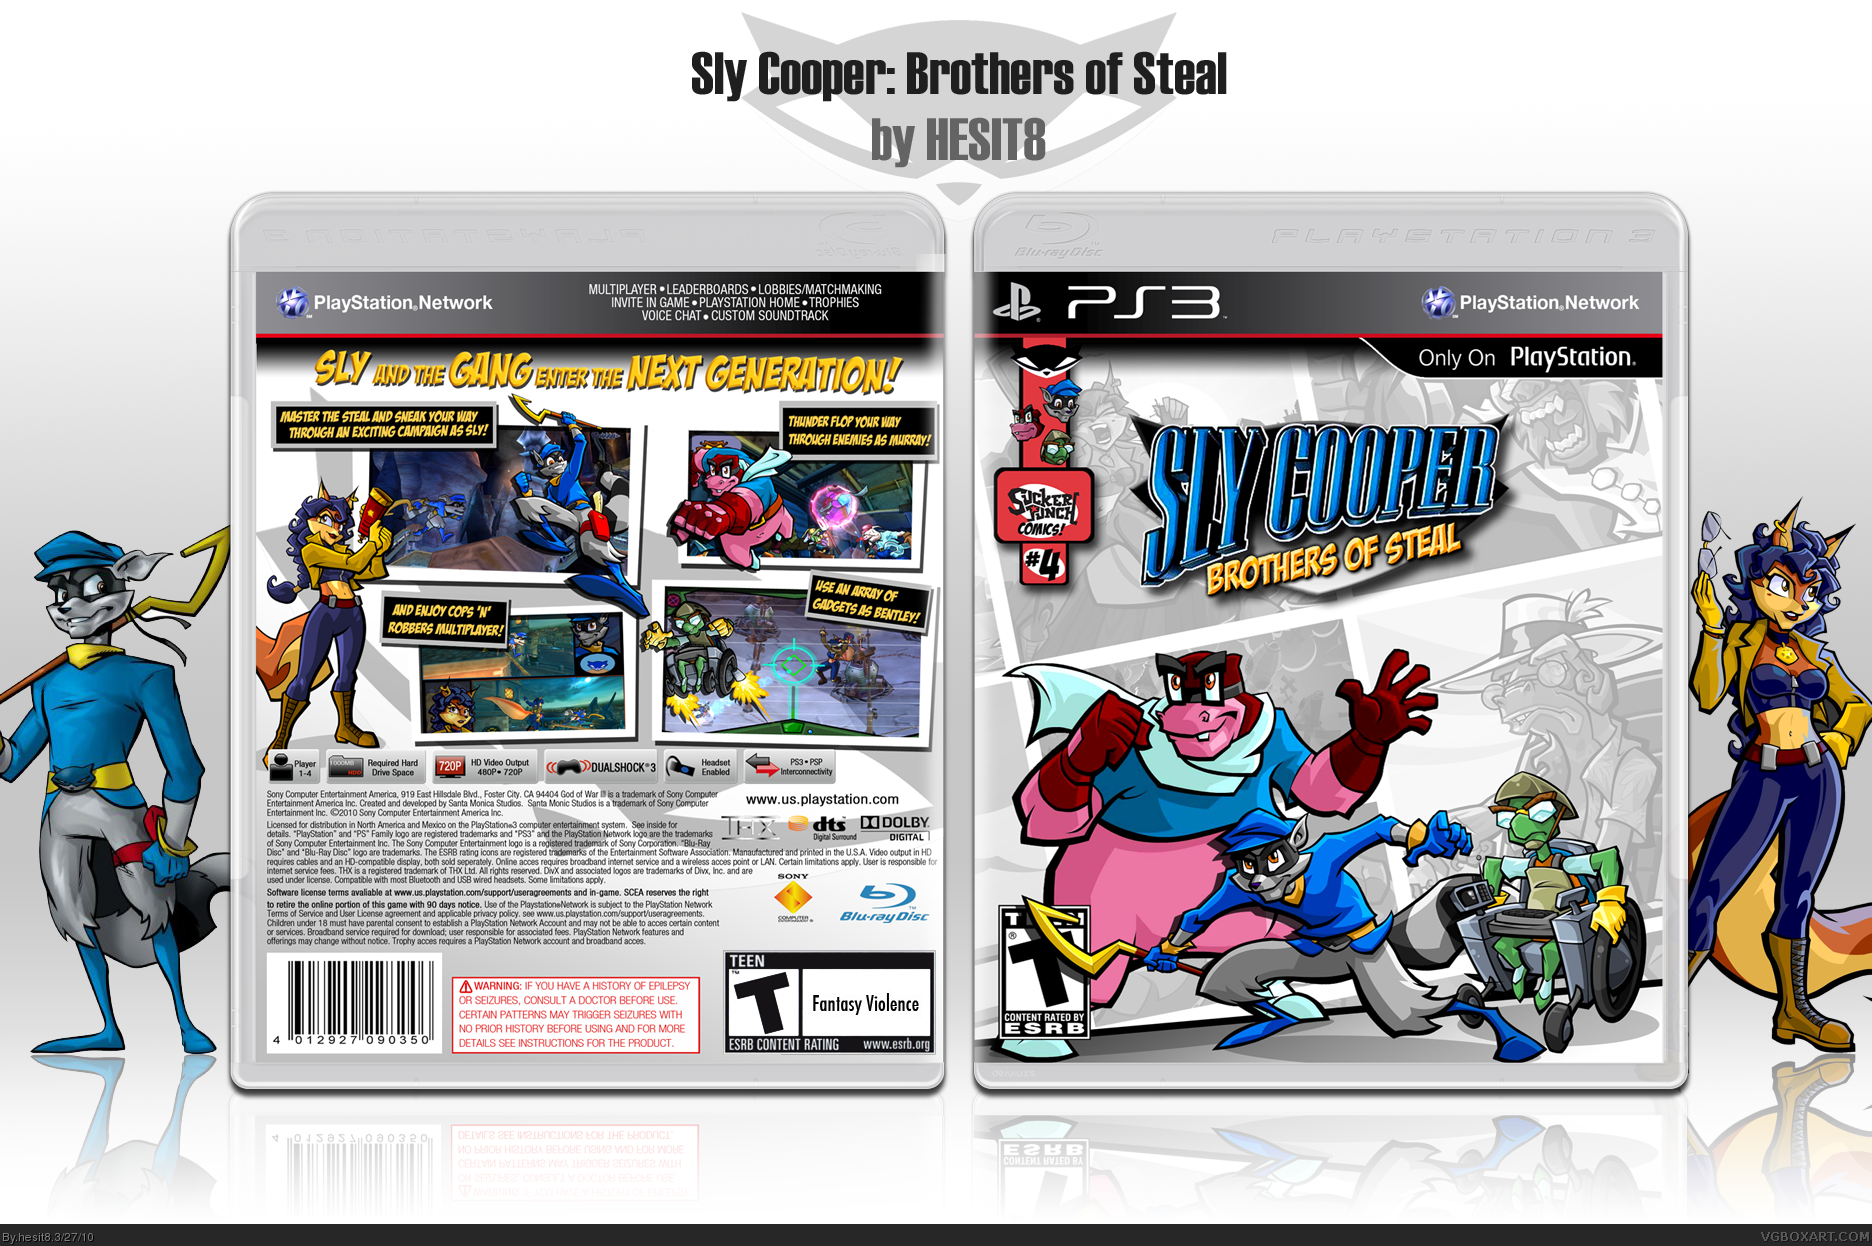 Sly Cooper: Brothers of Steal box cover